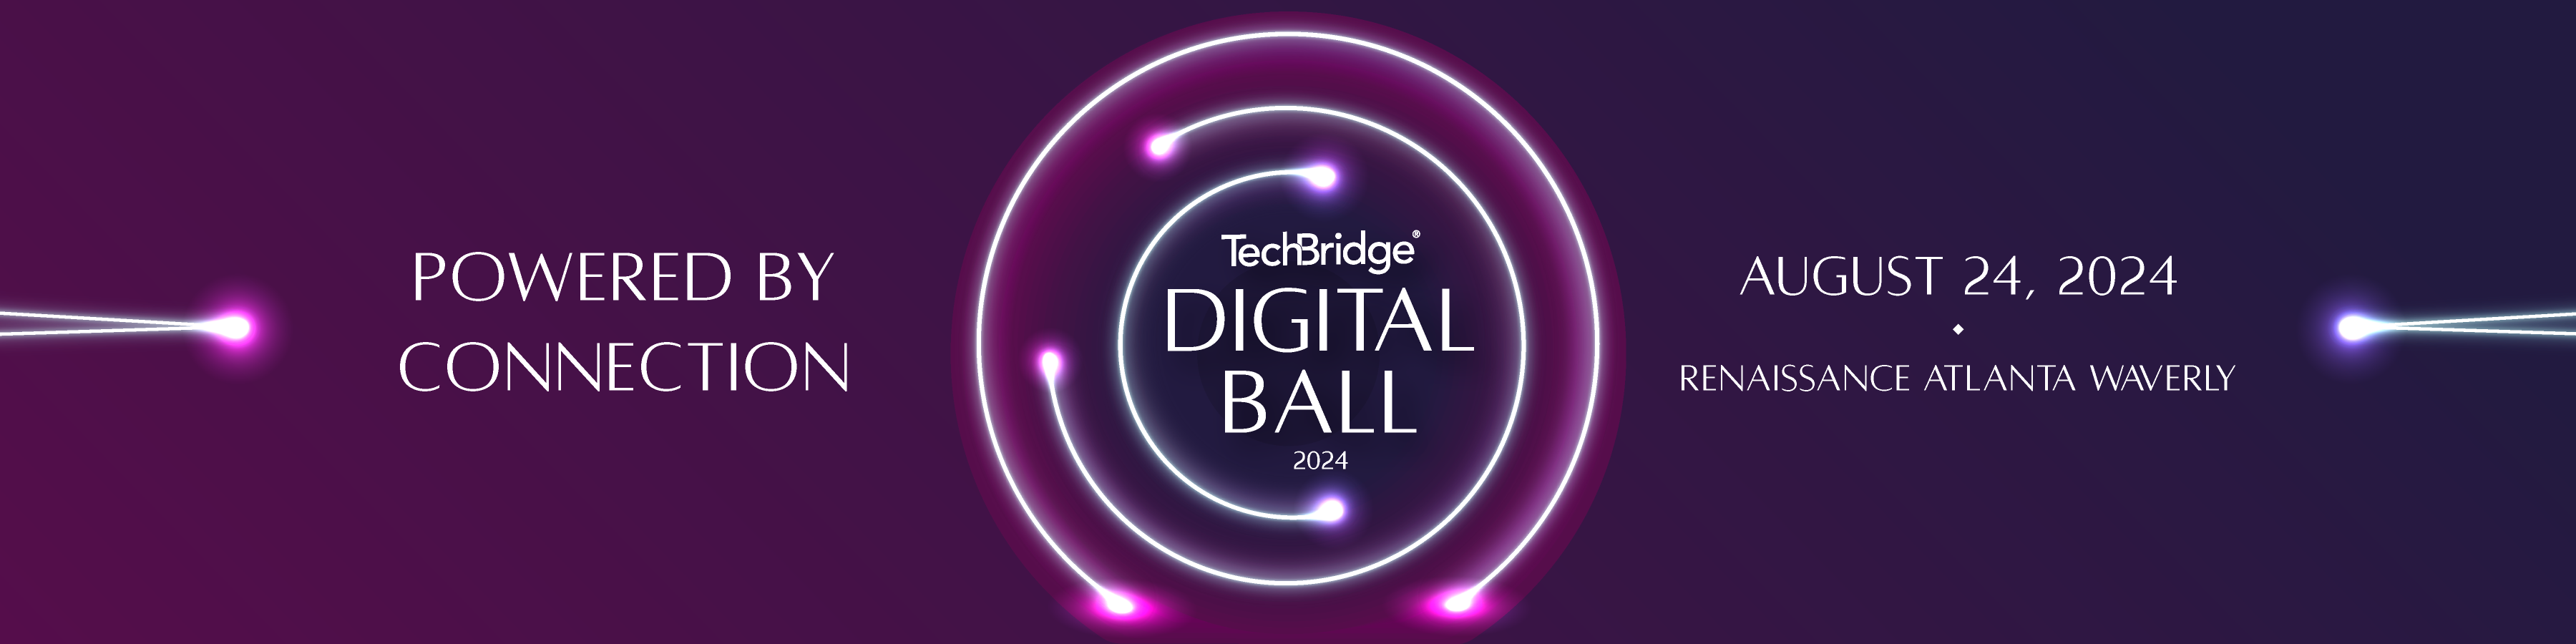 The Digital Ball 2024: Powered by Connection. August 24, 2024 at the Renaissance Waverly Atlanta.